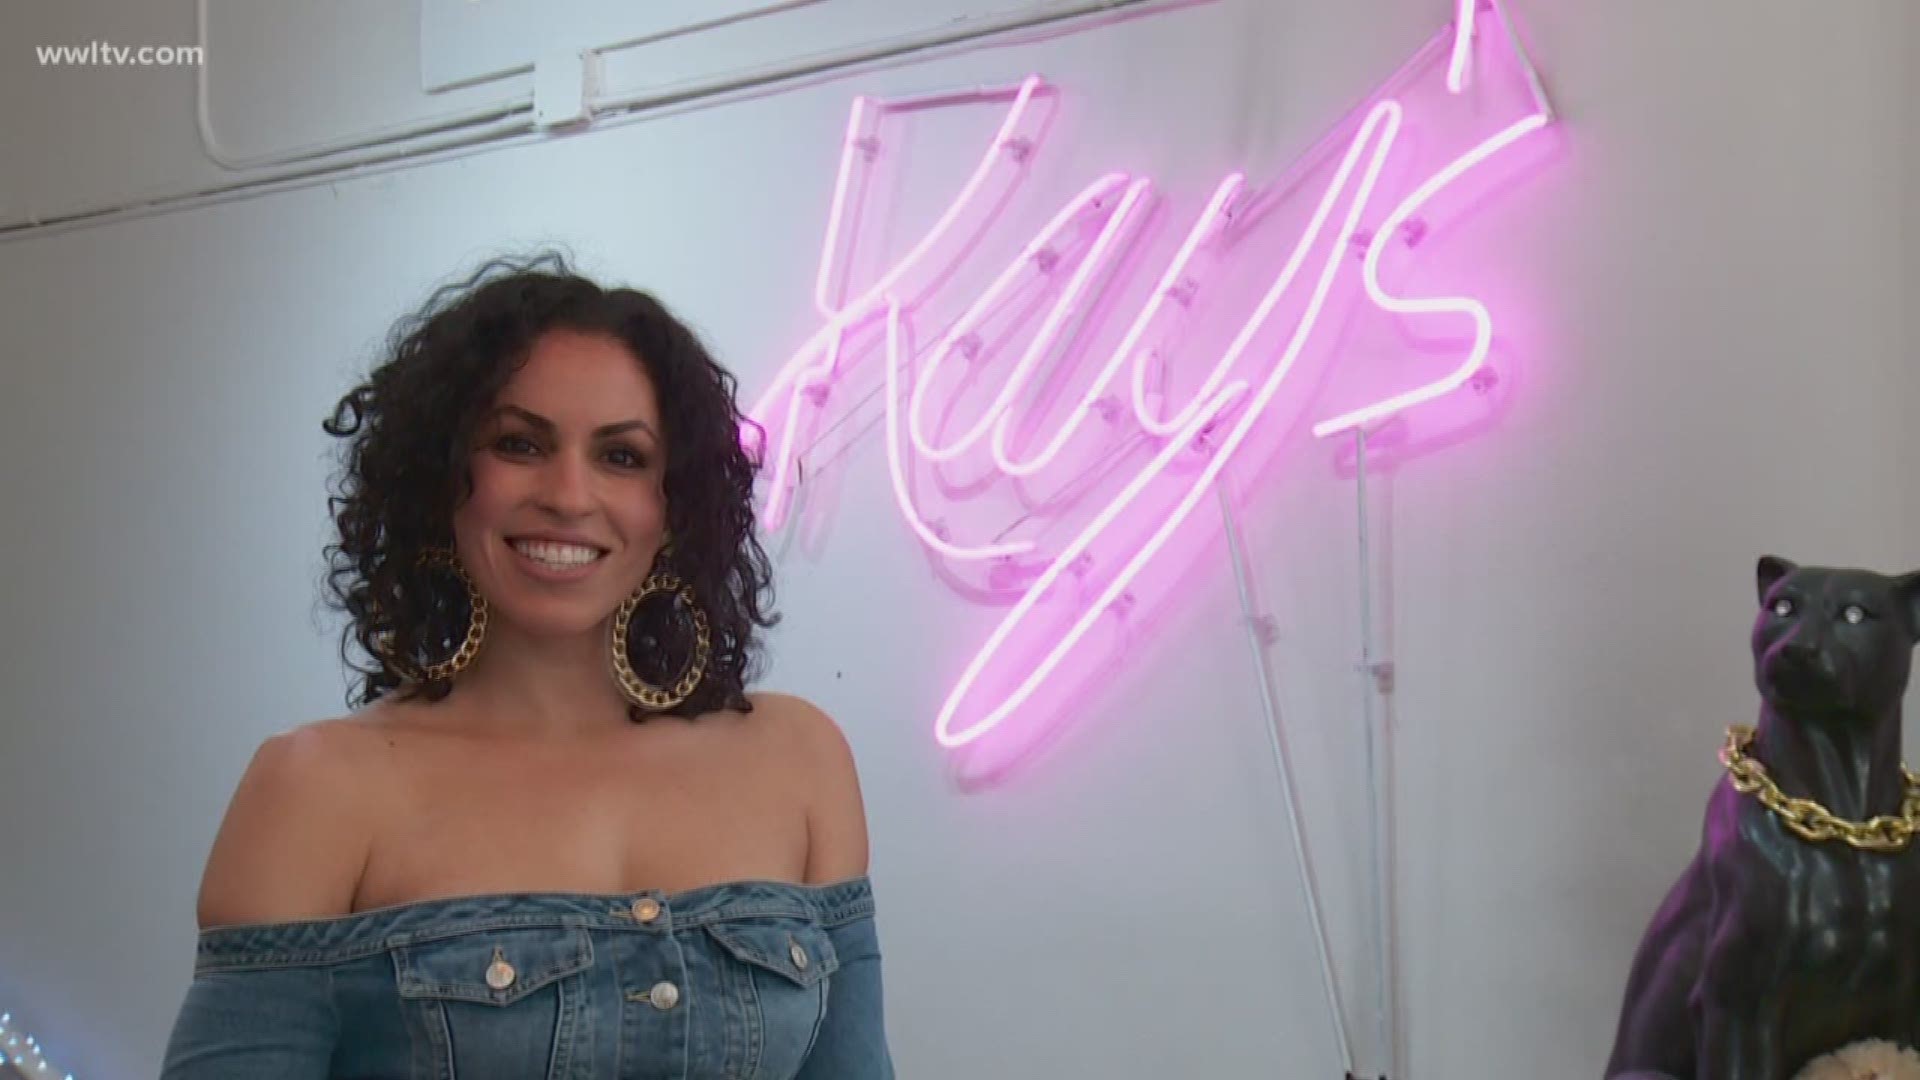 Once bullied for her weight, Woman opens boutique to highlight beauty in all sizes